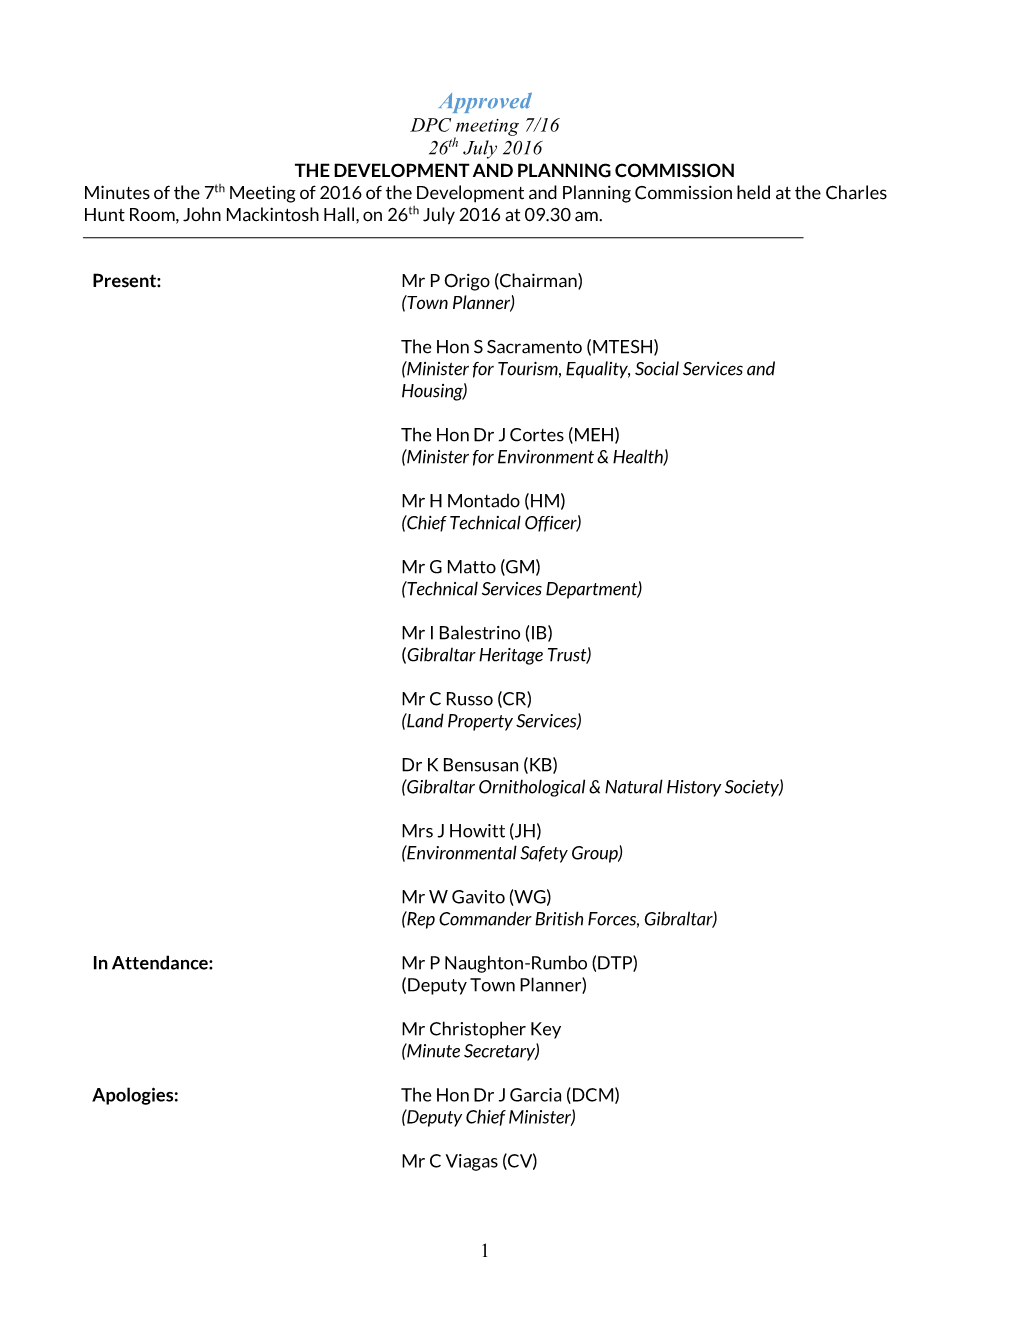 Approval of Minutes of the 1St Meeting of the Commission Held on the 12Th January 2005 at 2